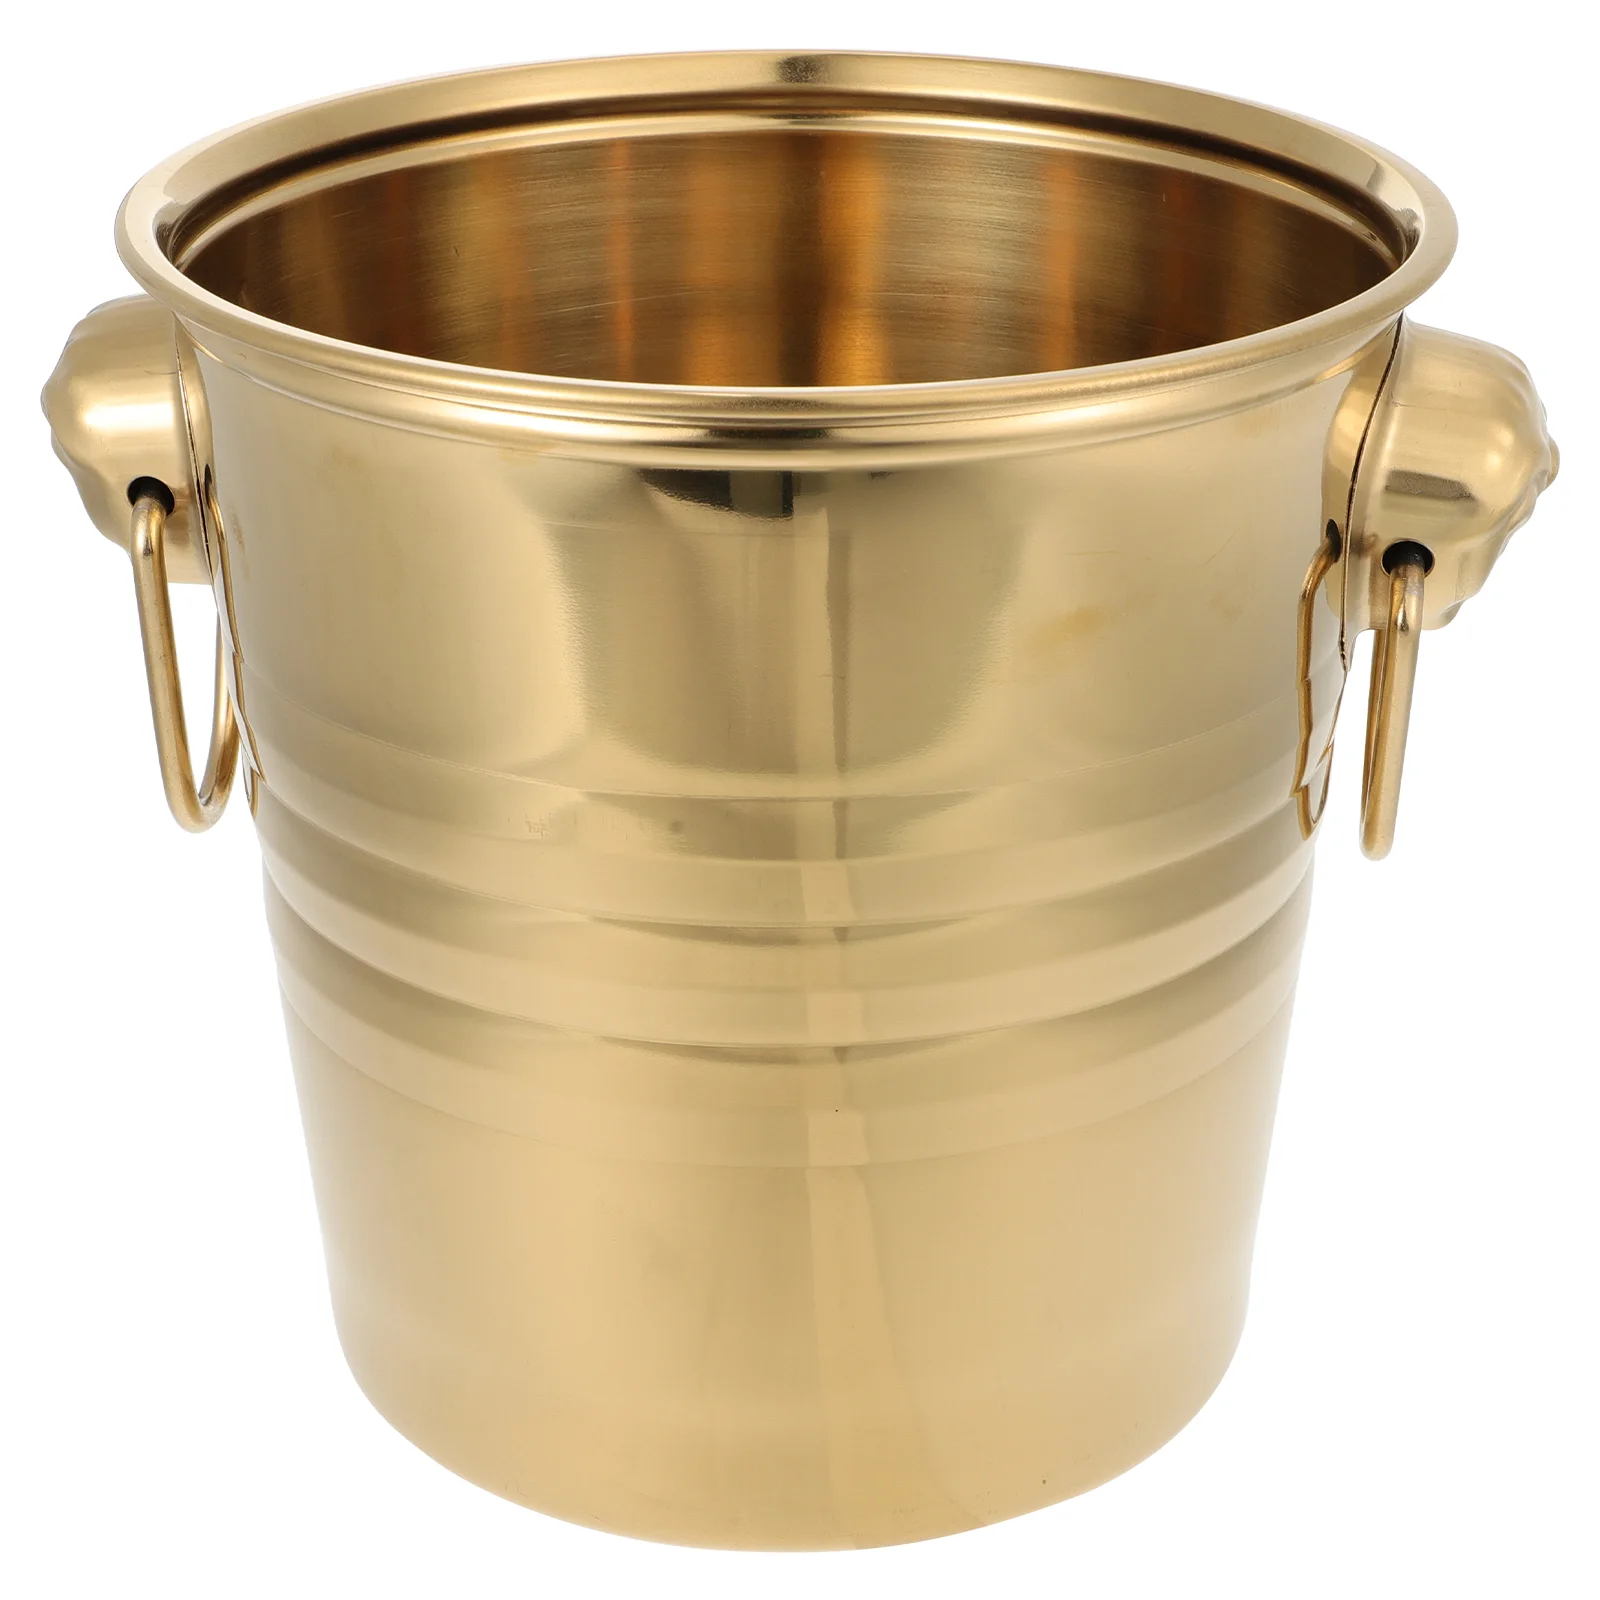 

Bucket Icechampagne Chiller Cooler Tub Beer Beverage Metal Bar Buckets Steel Party Insulated Stainless Drink Flower Cocktail